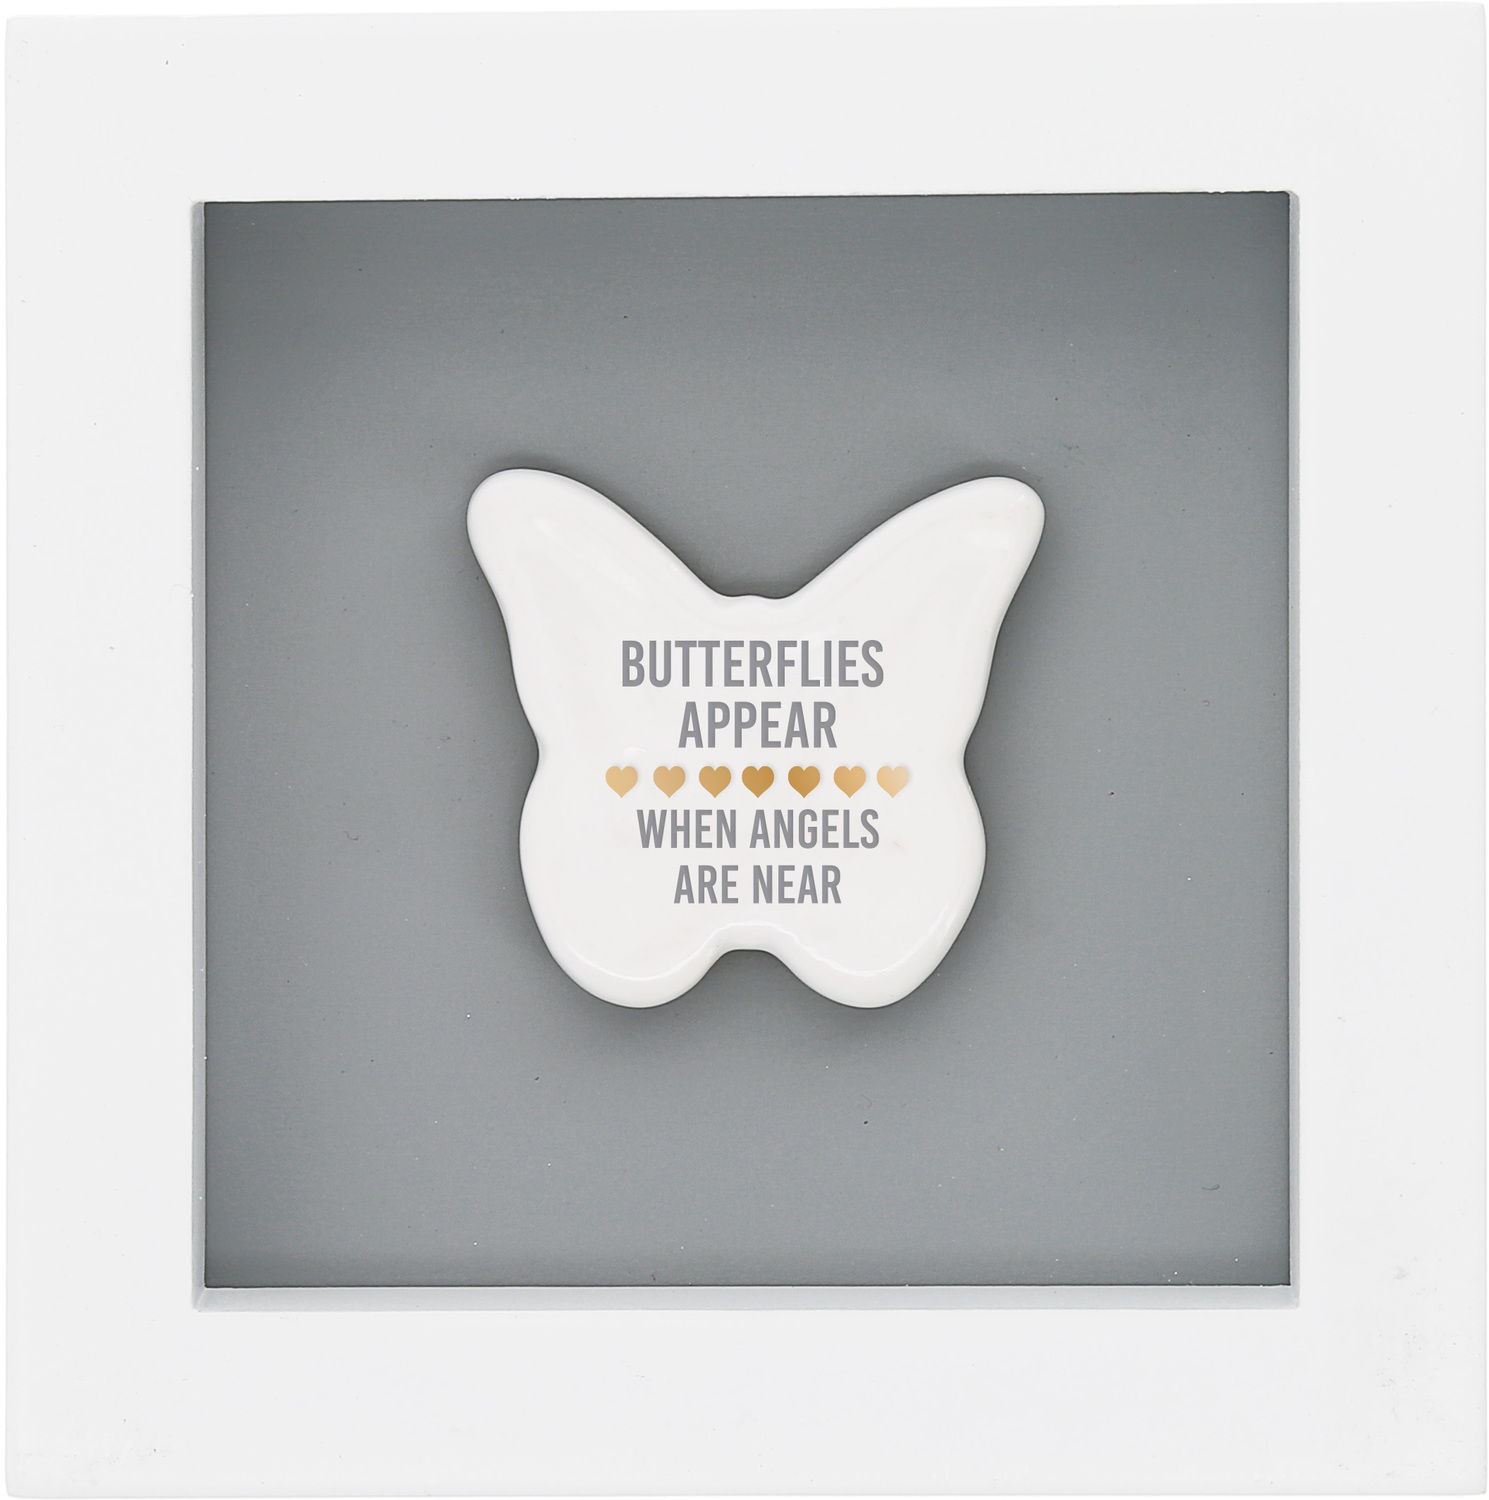 Butterflies Appear by Said with Love - Butterflies Appear - 4.75" Plaque